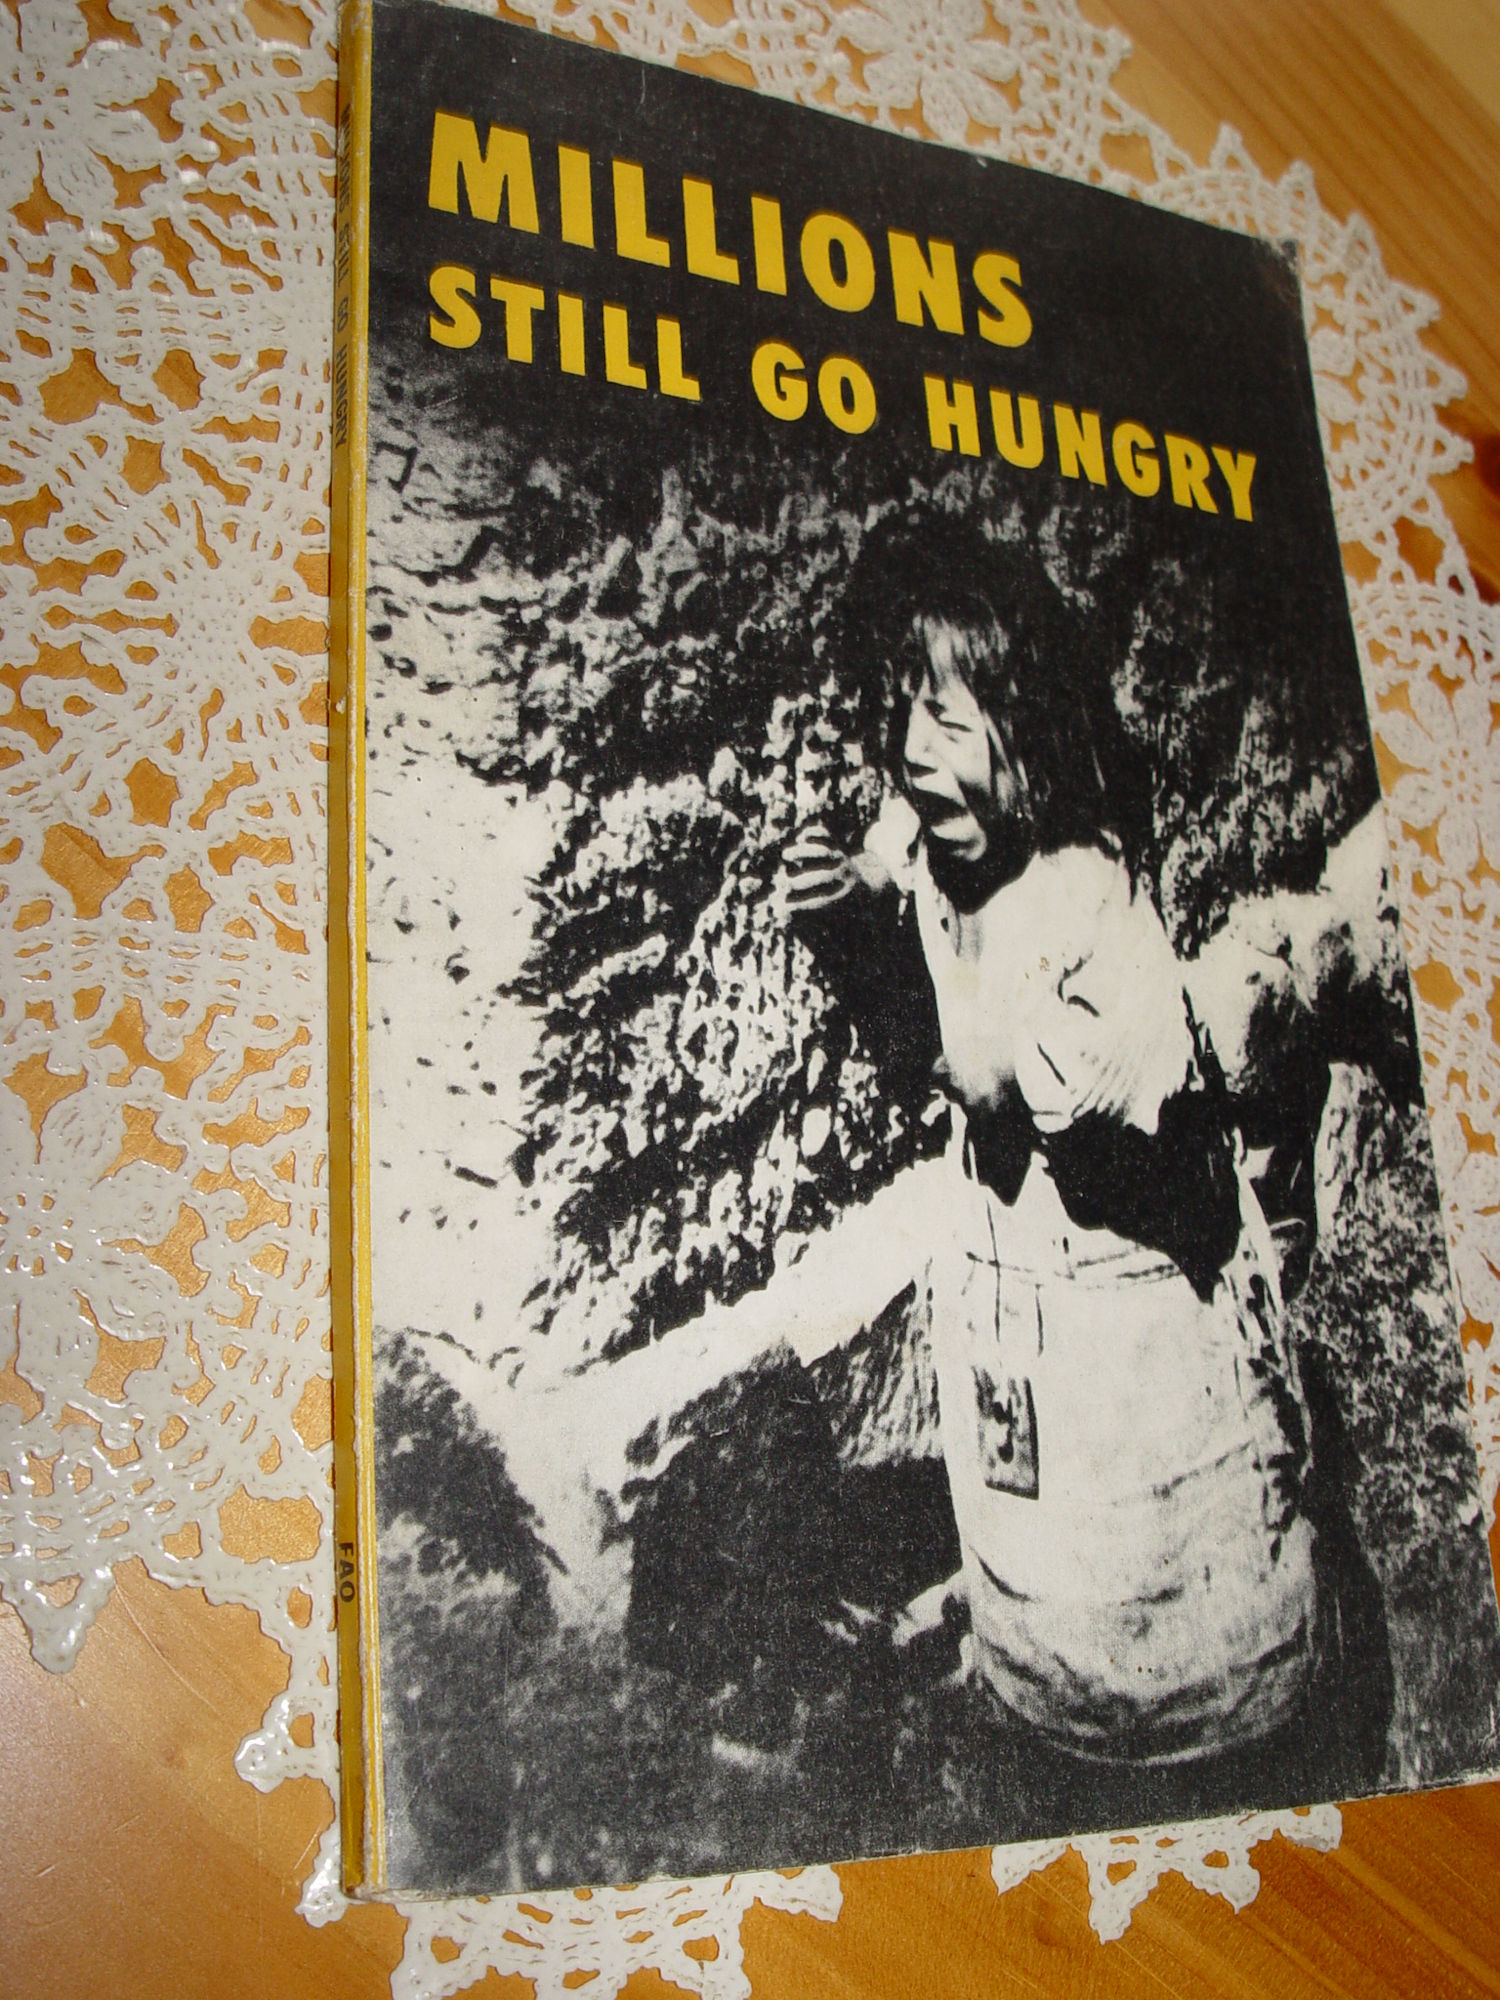 Millions Still Go Hungry 1957 Publication
                        Global hunger